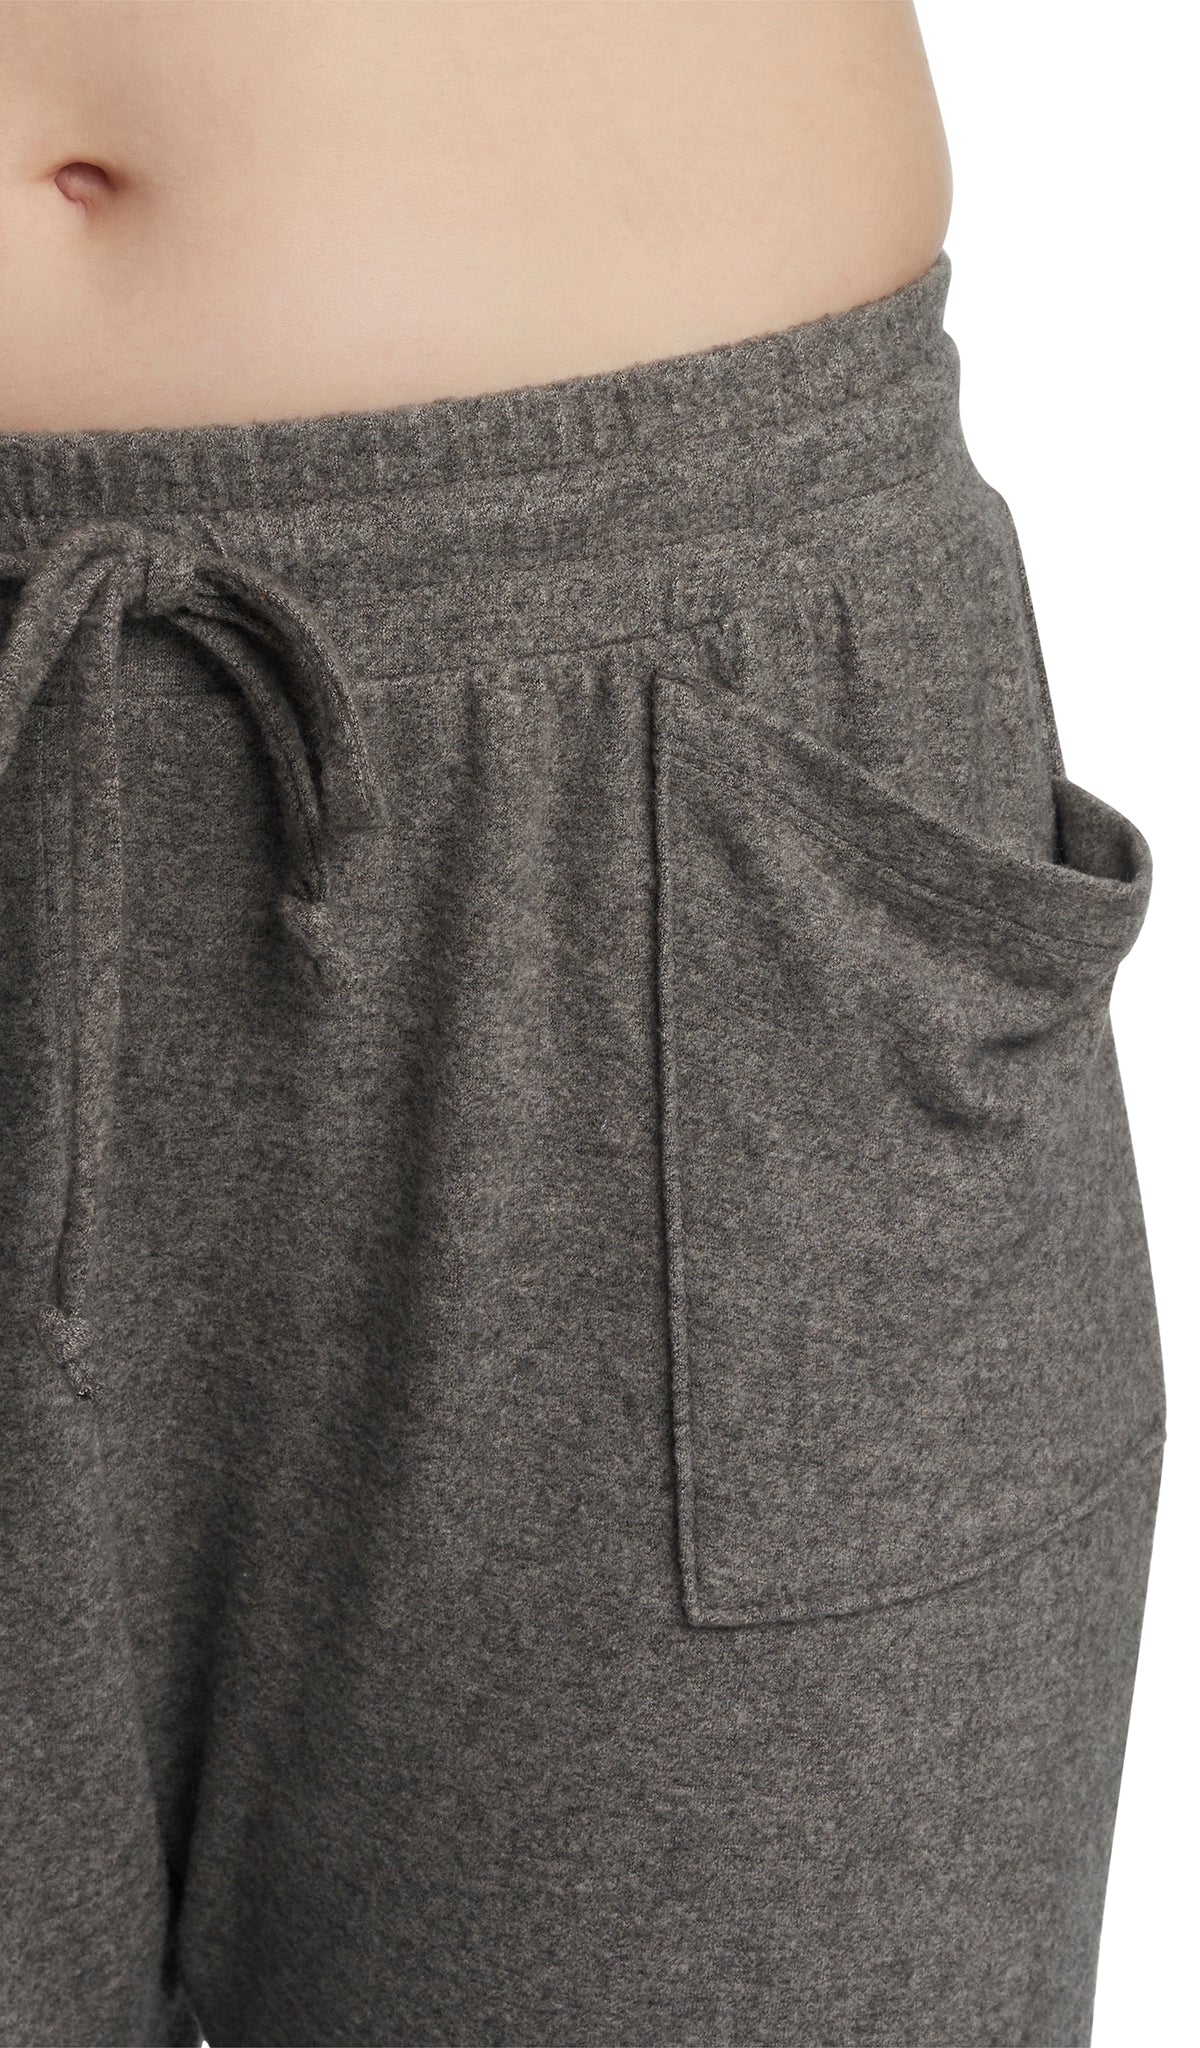 Charcoal Whitney 2-Piece drawstring waistband and pocket detail.